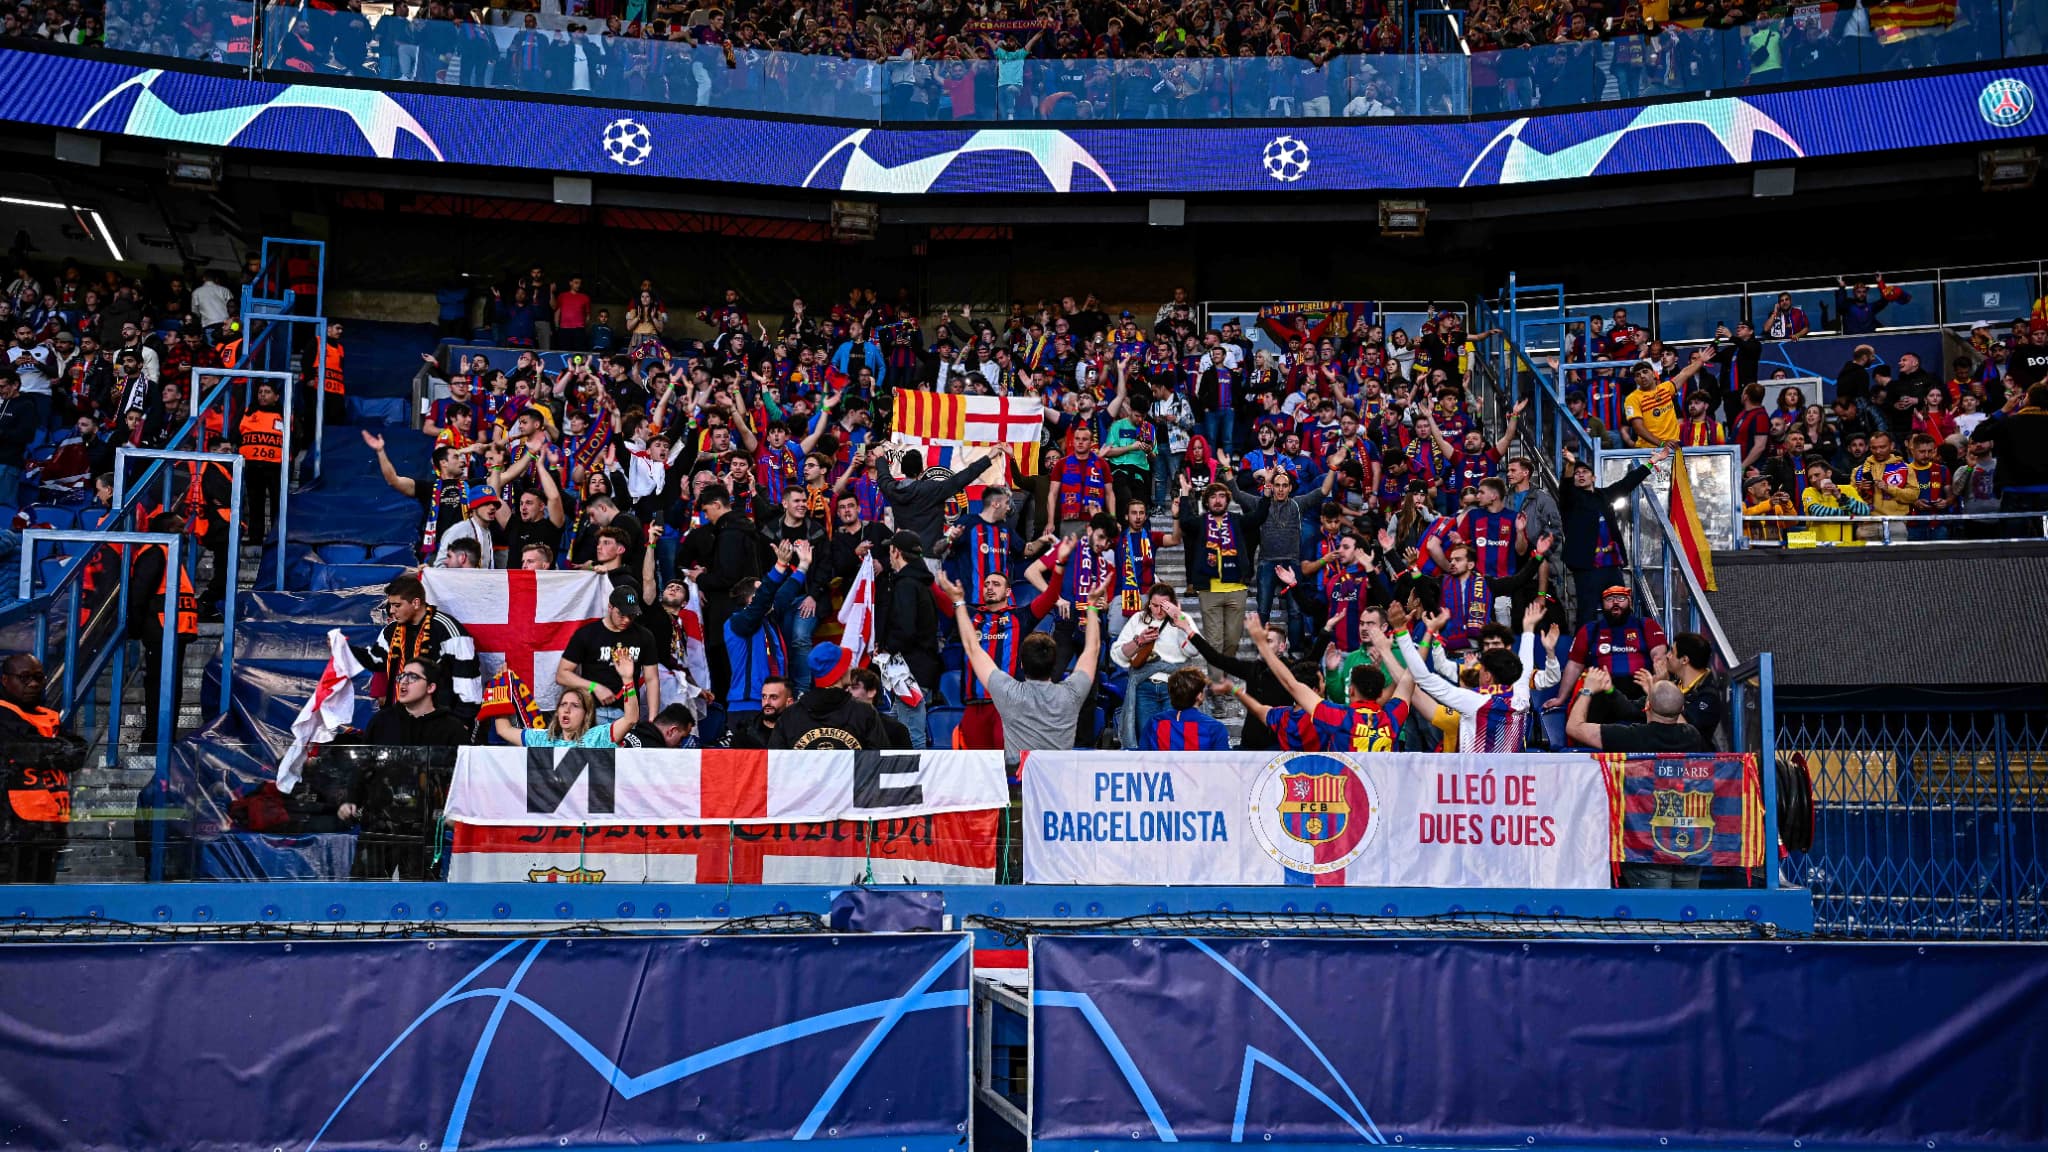 UEFA sanctions Barcelona for racist gestures from supporters and damage to the Parc des Princes